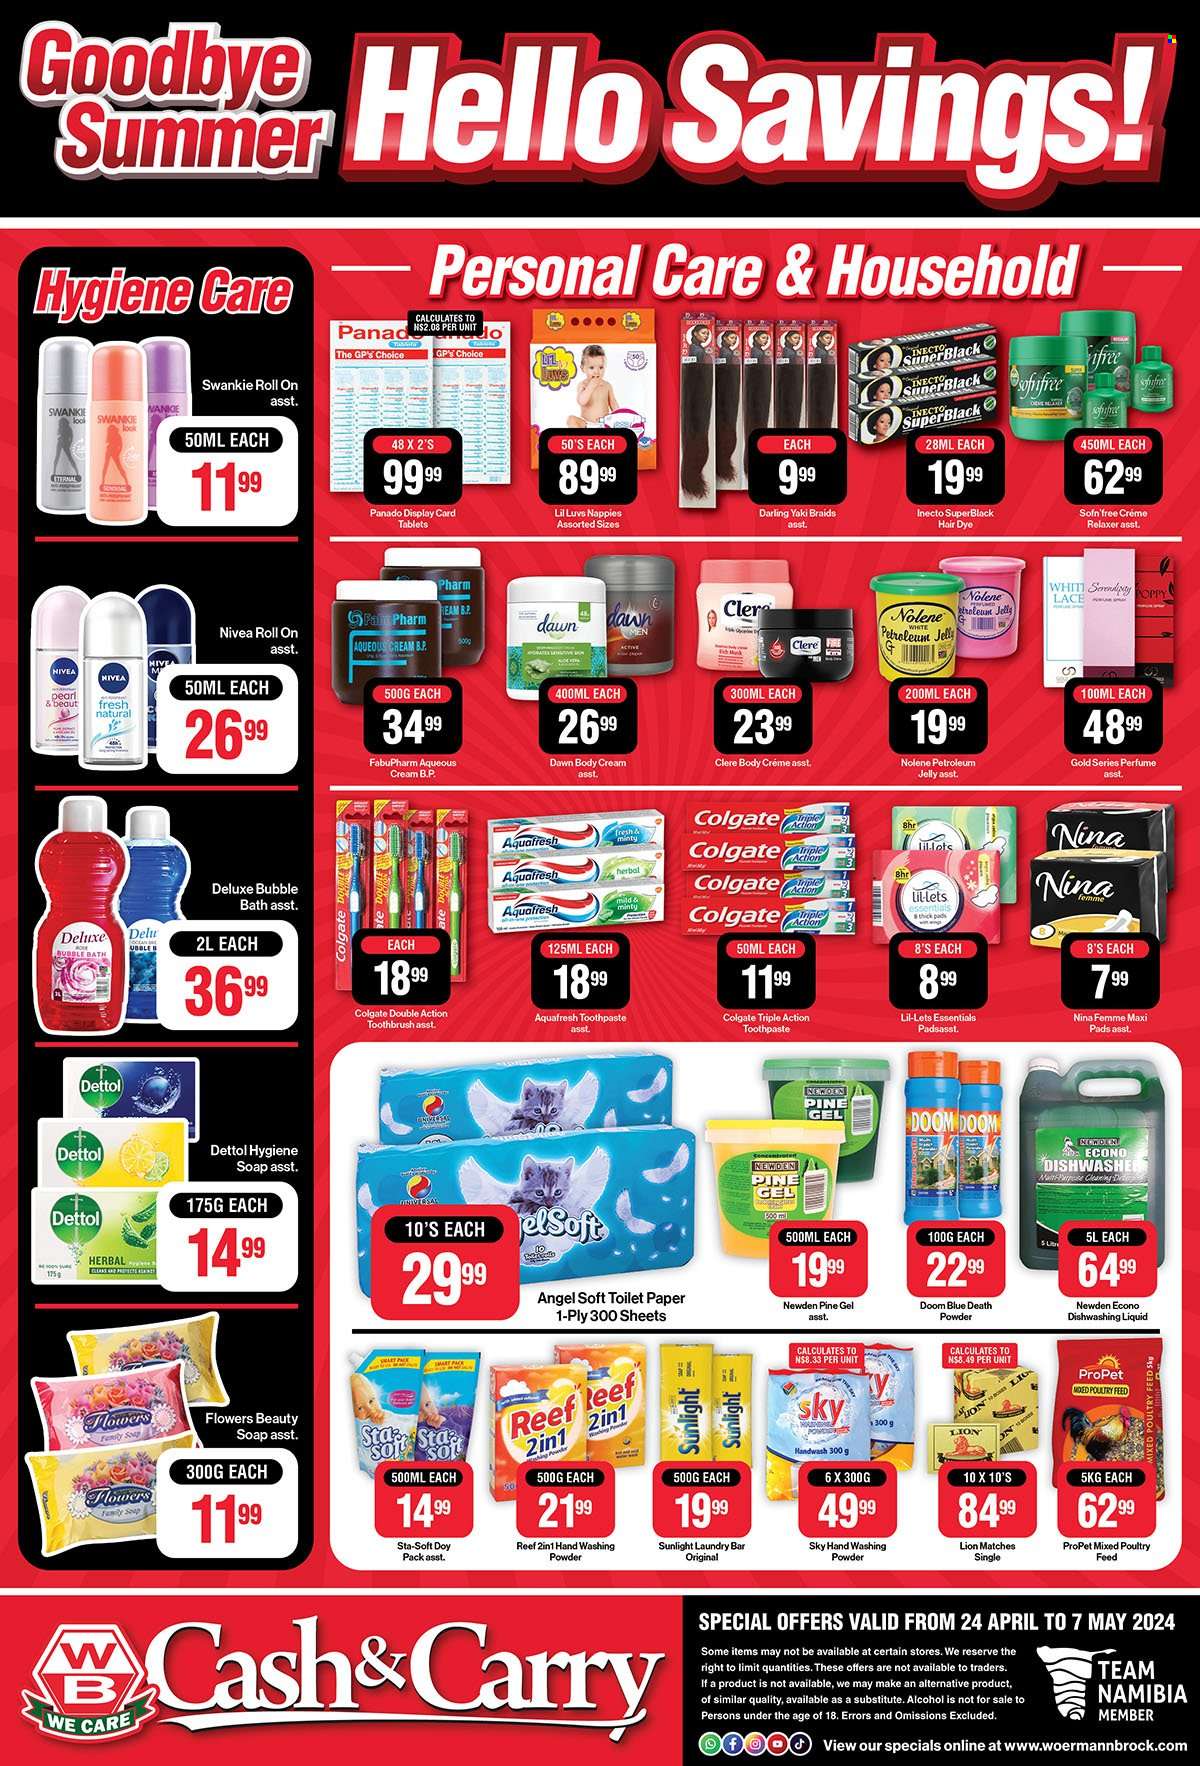 thumbnail - Woermann Brock catalogue  - 24/04/2024 - 07/05/2024 - Sales products - alcohol, nappies, toilet paper, pads, Dettol, laundry powder, laundry soap bar, Sunlight, dishwashing liquid, bubble bath, Nivea, hand wash, Colgate, toothbrush, toothpaste, sanitary pads, Lil-lets, petroleum jelly, hair color, relaxer, Clere, body cream, eau de parfum, roll-on, Swankie. Page 4.